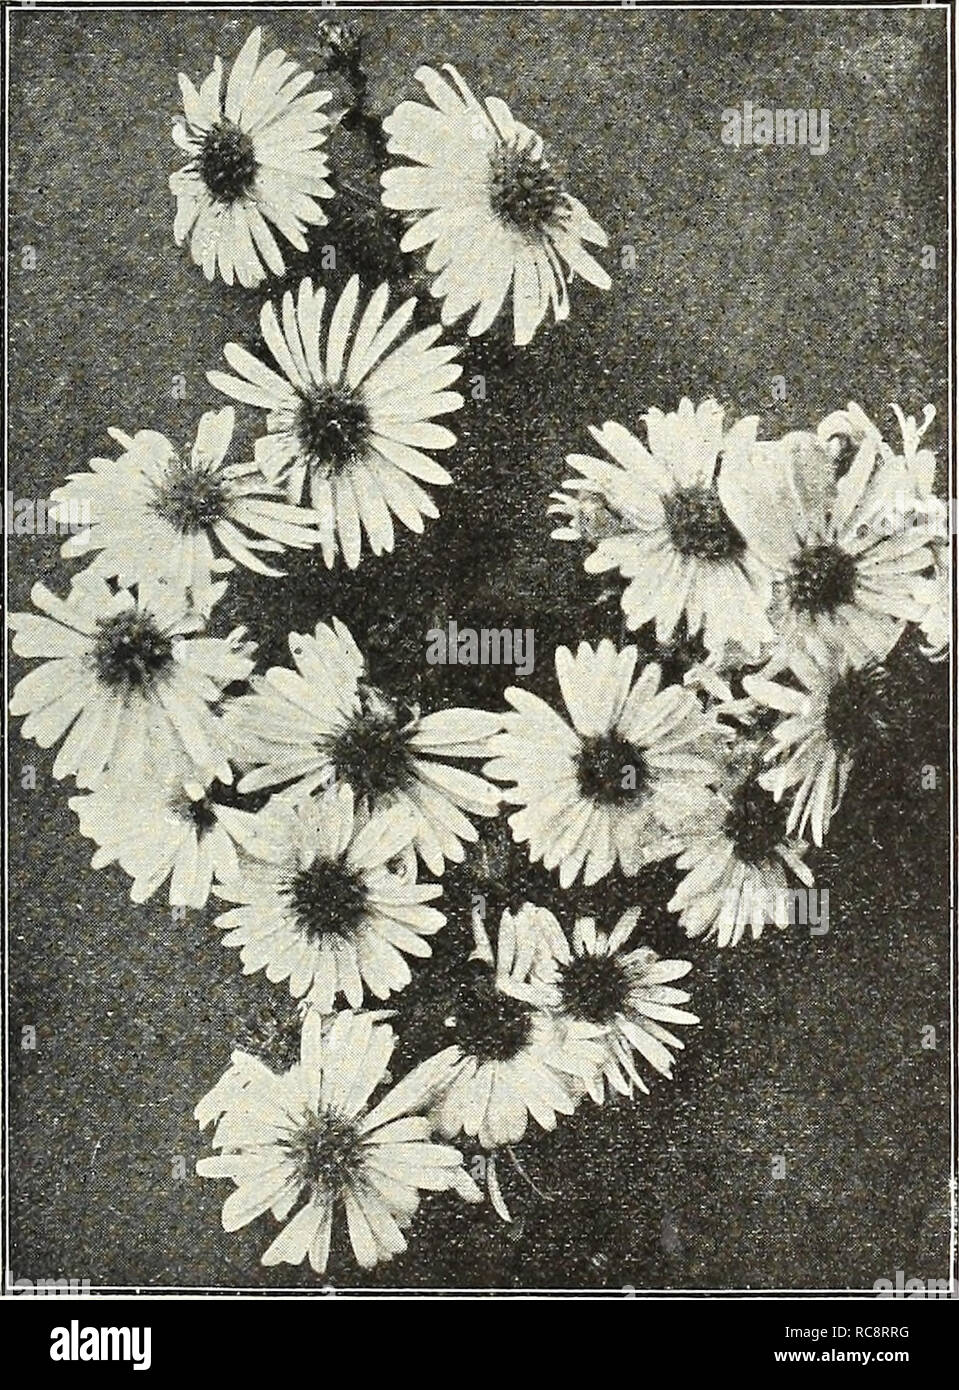 . Dreer's garden book 1922. Seeds Catalogs; Nursery stock Catalogs; Gardening Equipment and supplies Catalogs; Flowers Seeds Catalogs; Vegetables Seeds Catalogs; Fruit Seeds Catalogs. ASCI.HPIAS. Hardy Aster Novi Relgii Climax Fall-floiivering Hardy Asters (Michaelmas Daisies, or Starworts) These are among the showiest of our late-flowering hardy plants, giving a wealth of bloom during September and Oc- tober, a season when most other hardy flowers are past, and for the best effect should be planted in masses of one color. They grow freely in any soil. The collection offered below is made up o Stock Photo